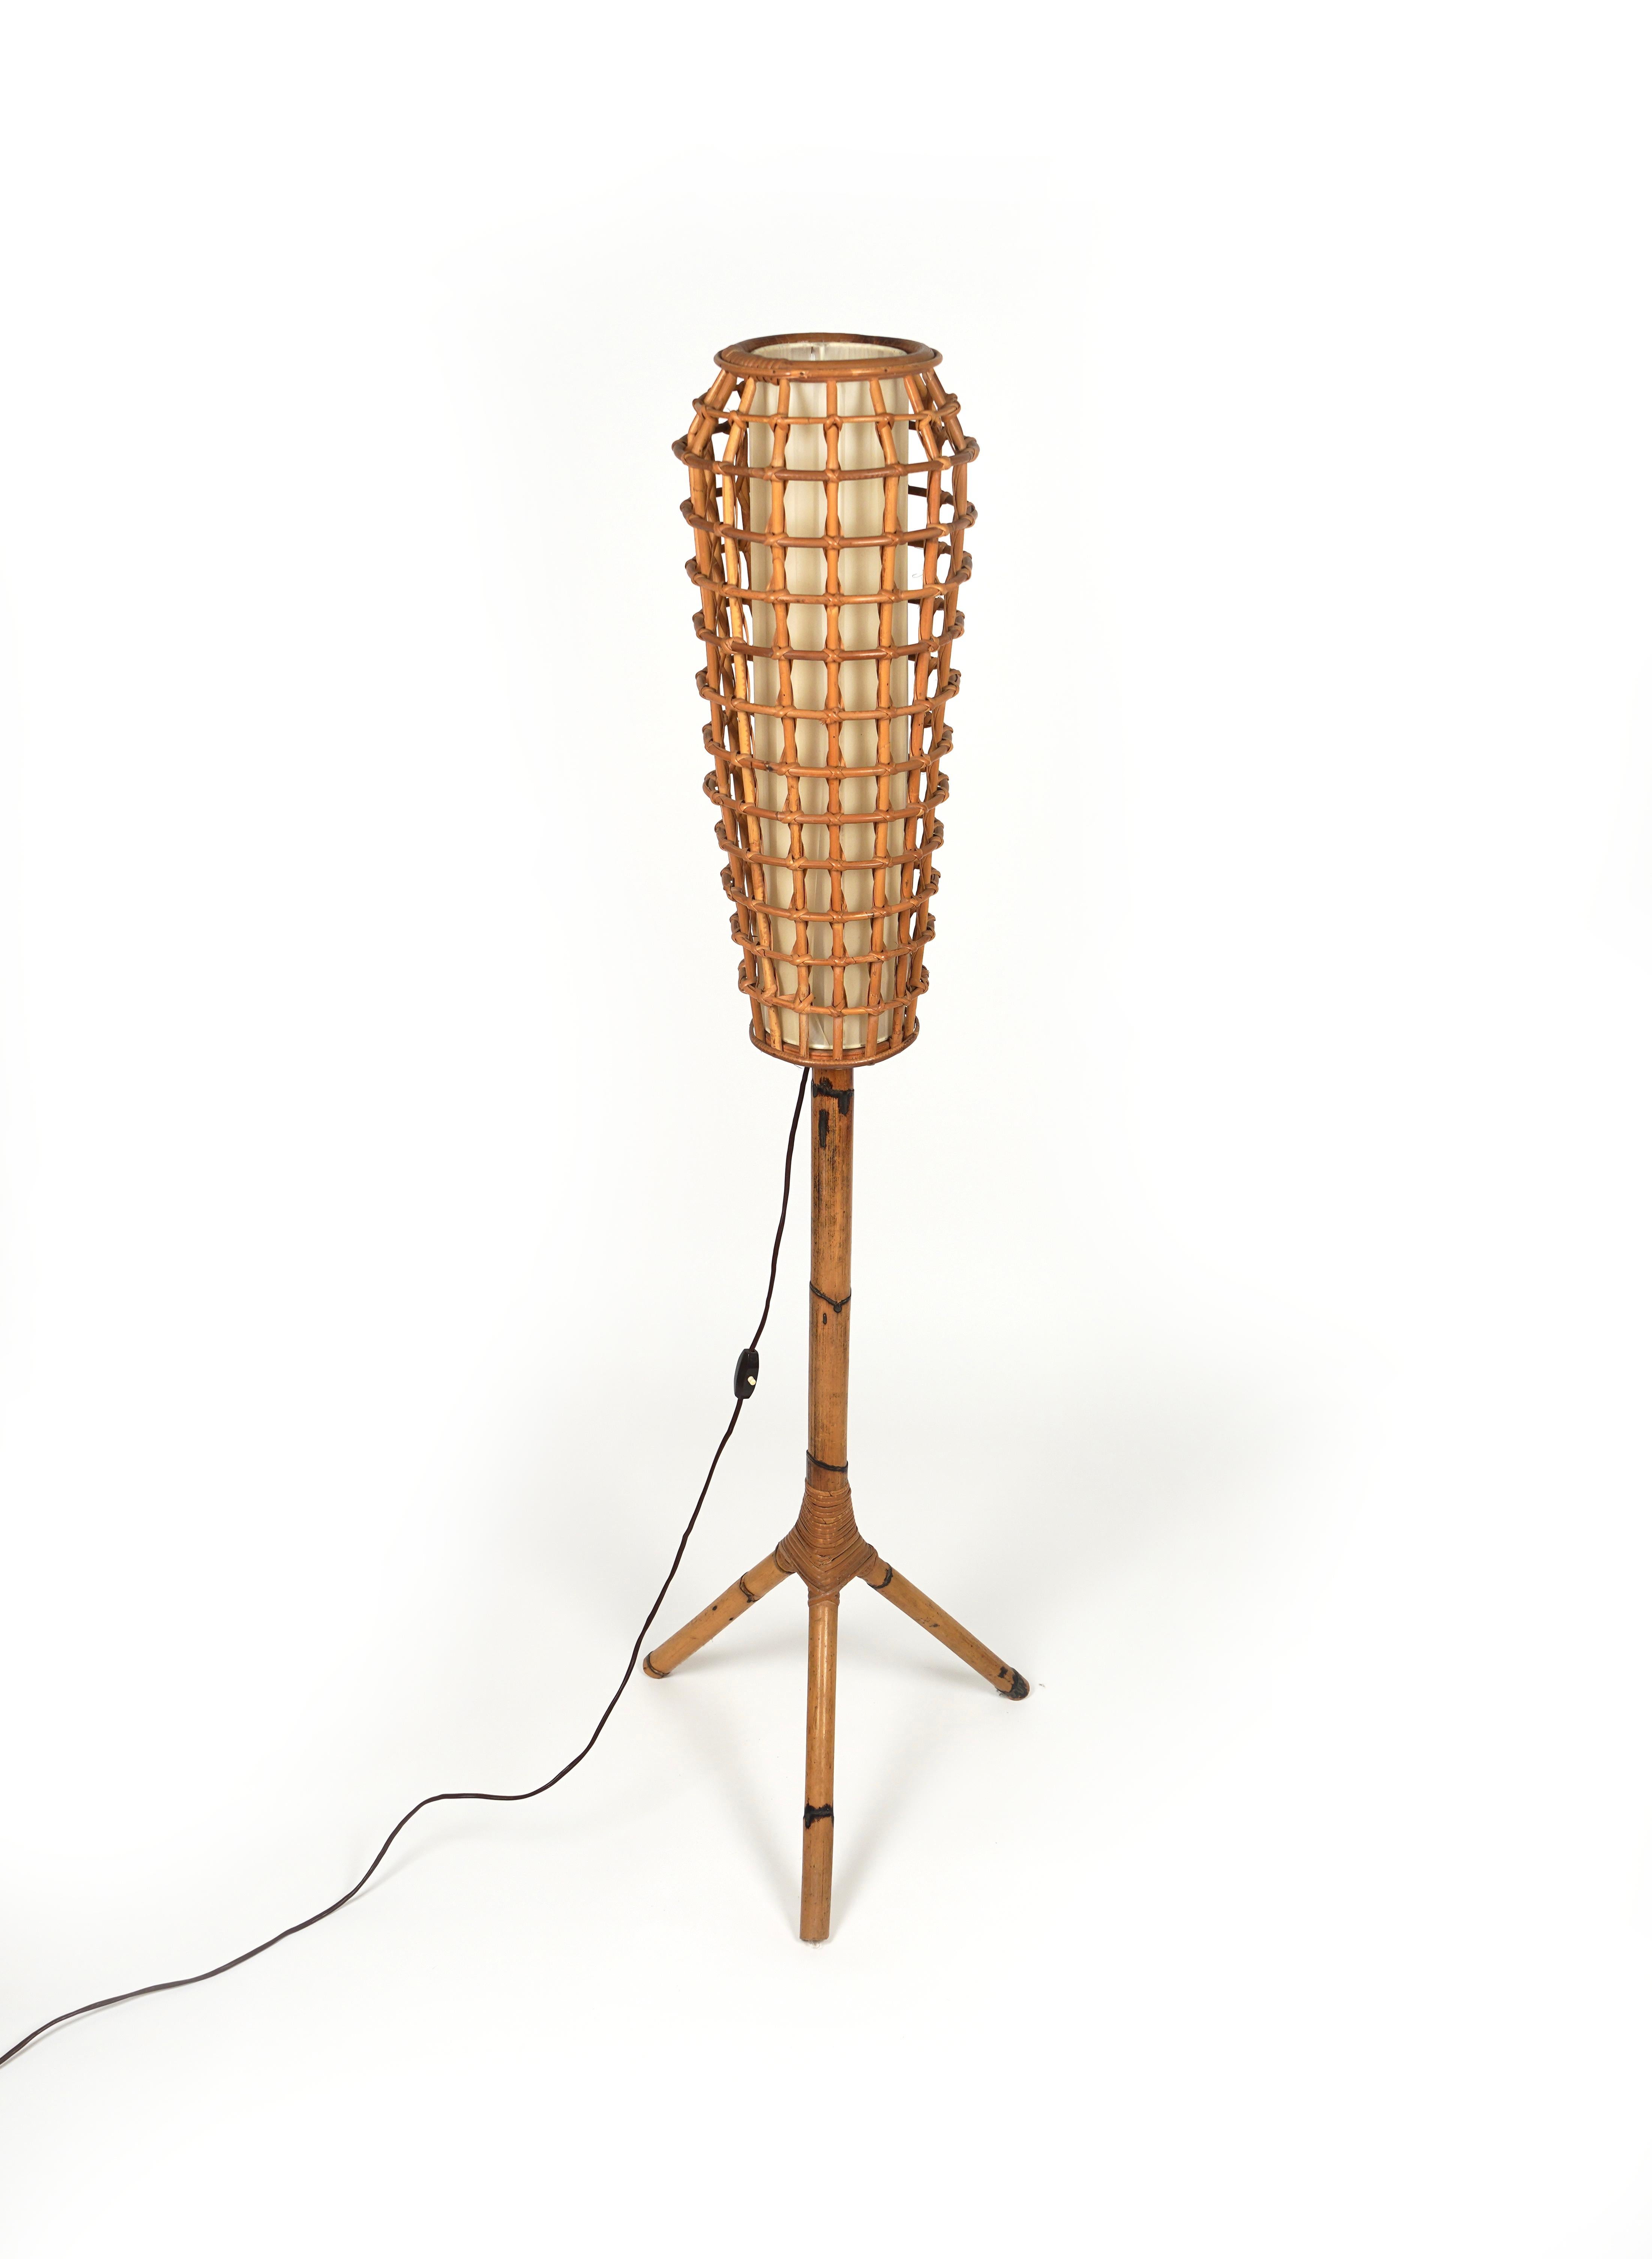 Midcentury amazing one lights floor lamp in bamboo and rattan in the style of the Italian designer Franco Albini.

Made in Italy in the 1960s.

The rattan material provides an easygoing chic, which flatters any interior.

Franco Albini (17